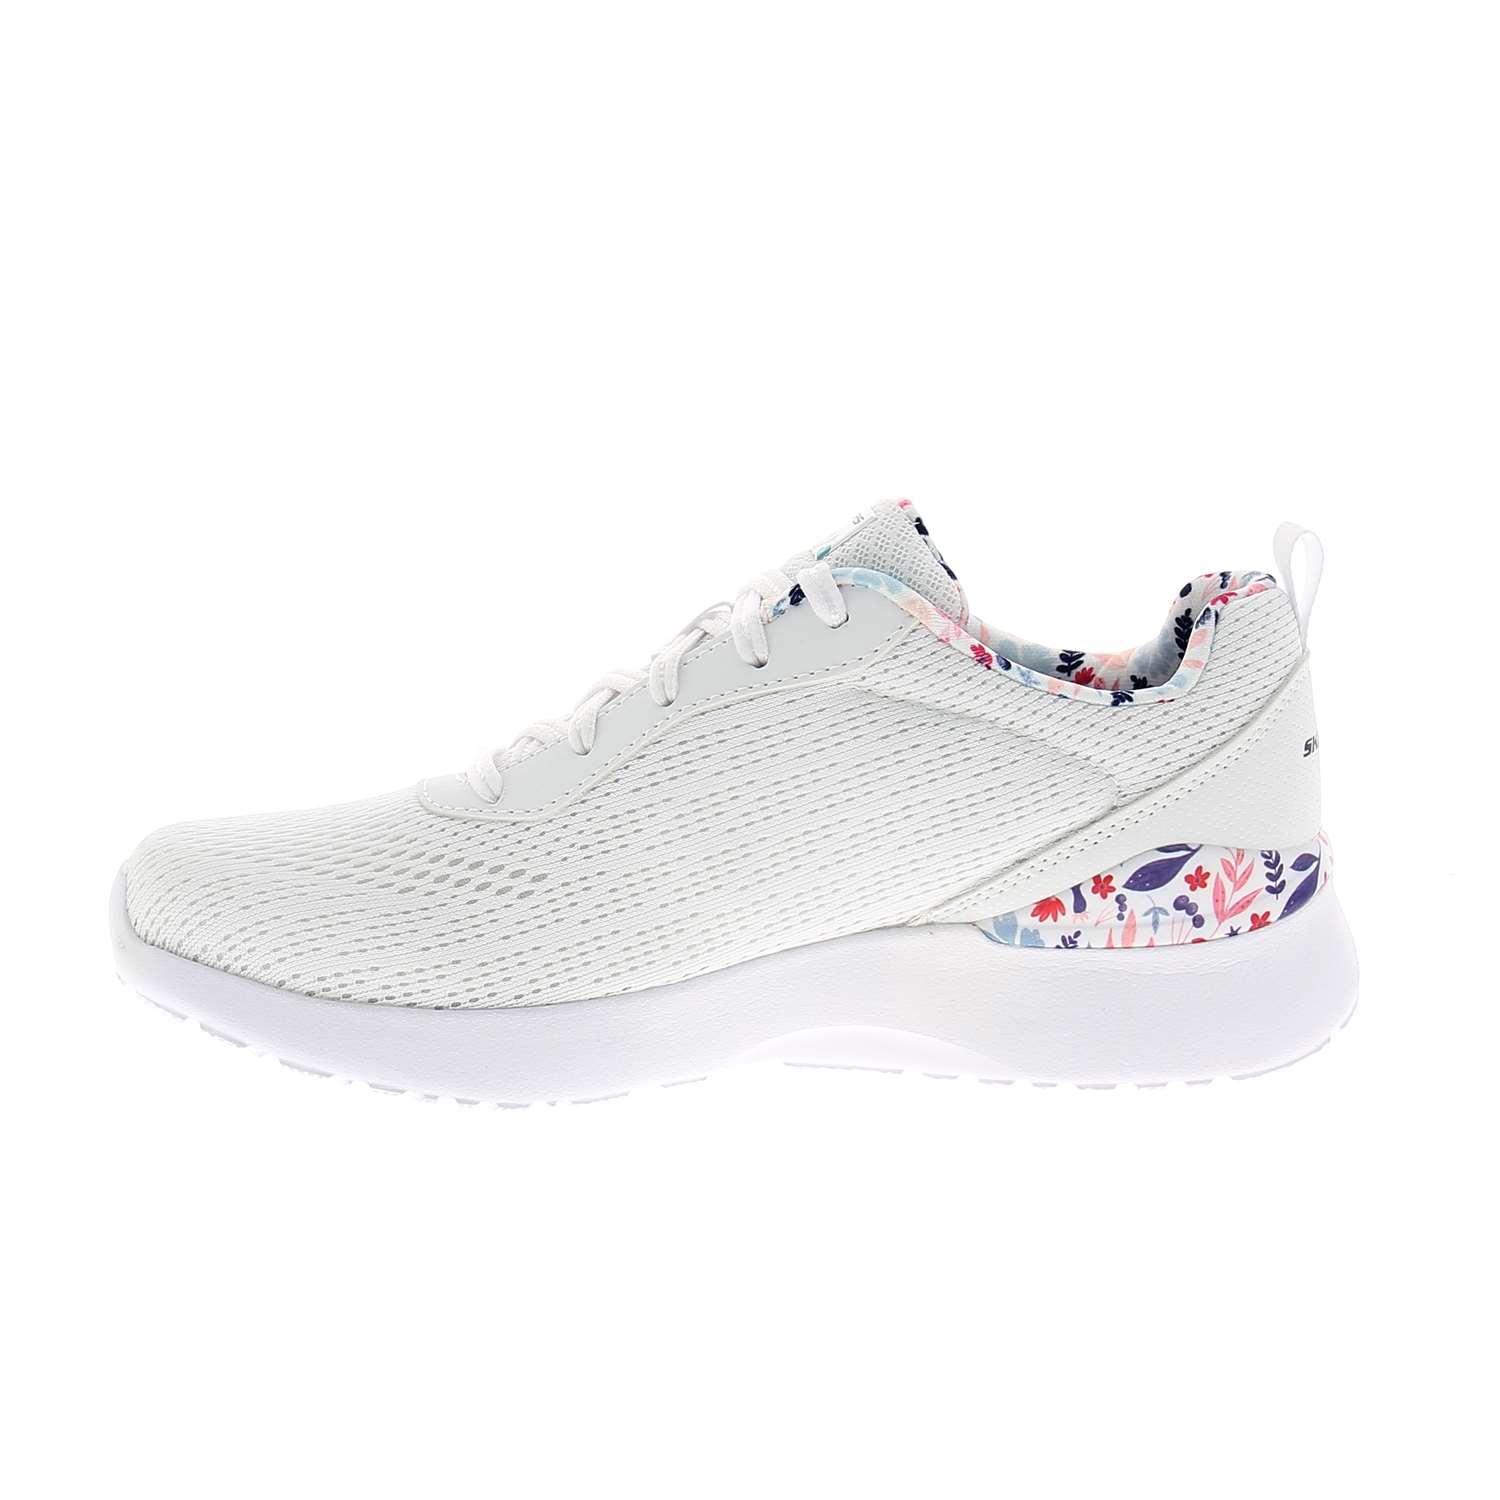 05 - SKECH AIR DYNAMIGHT - SKECHERS - Baskets - Textile